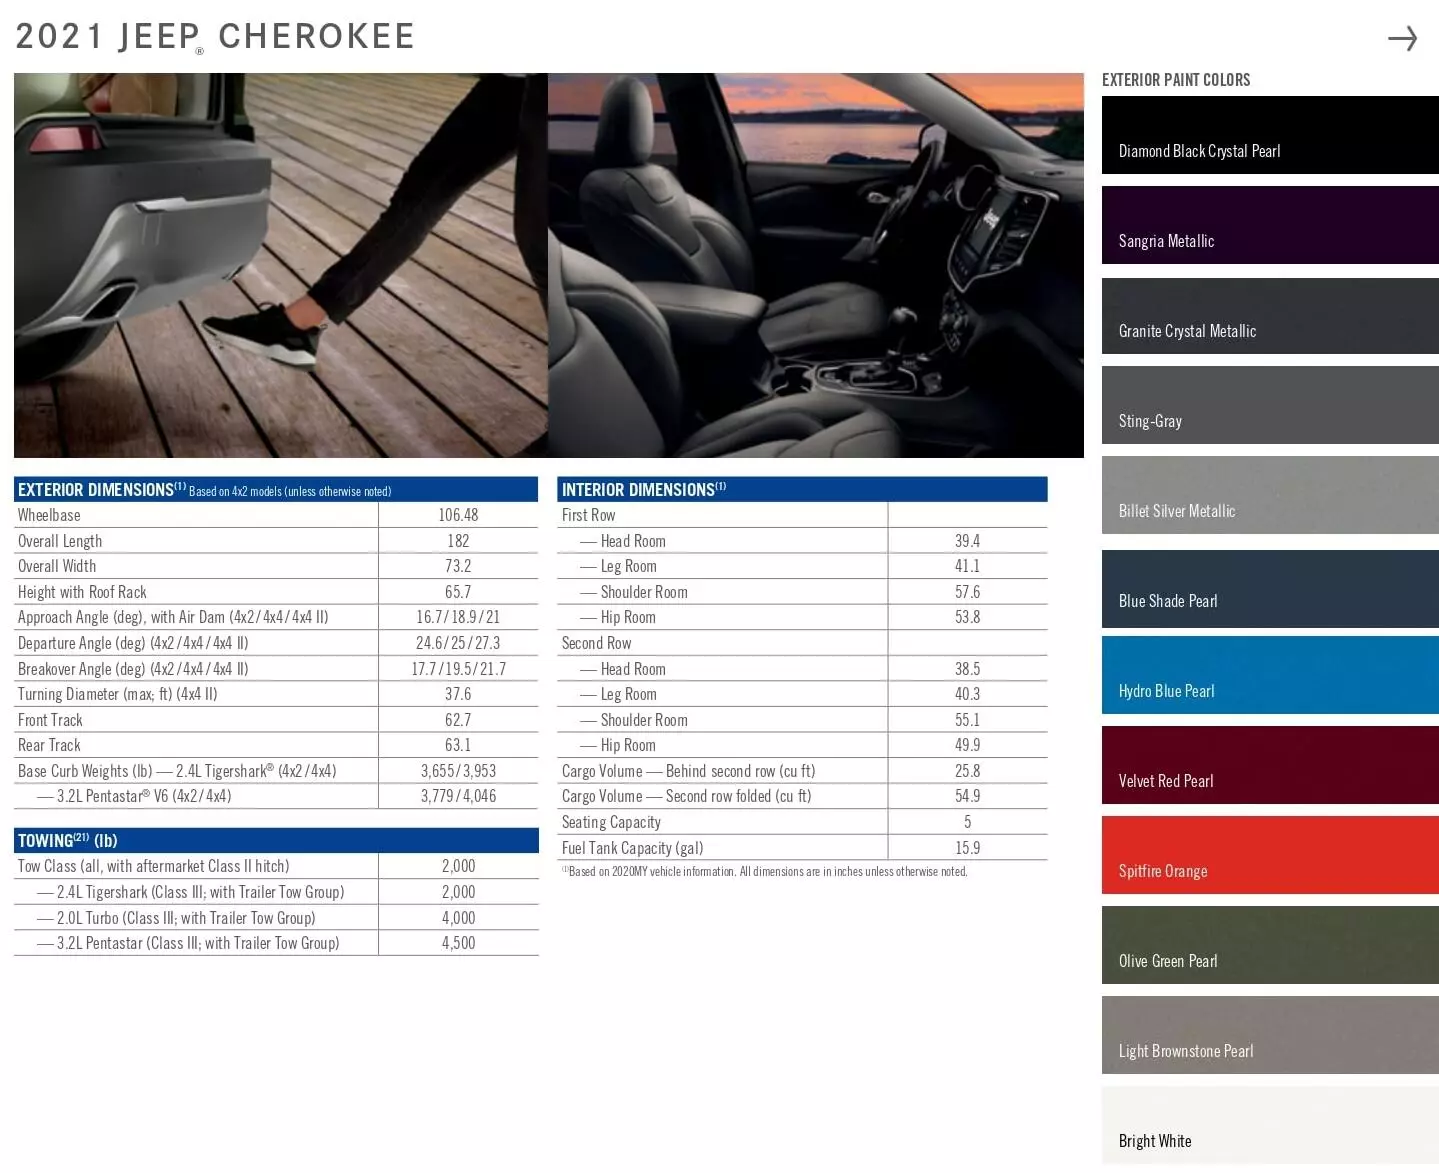 For the 2022 year color shades and examples of the exterior color of the jeep model.